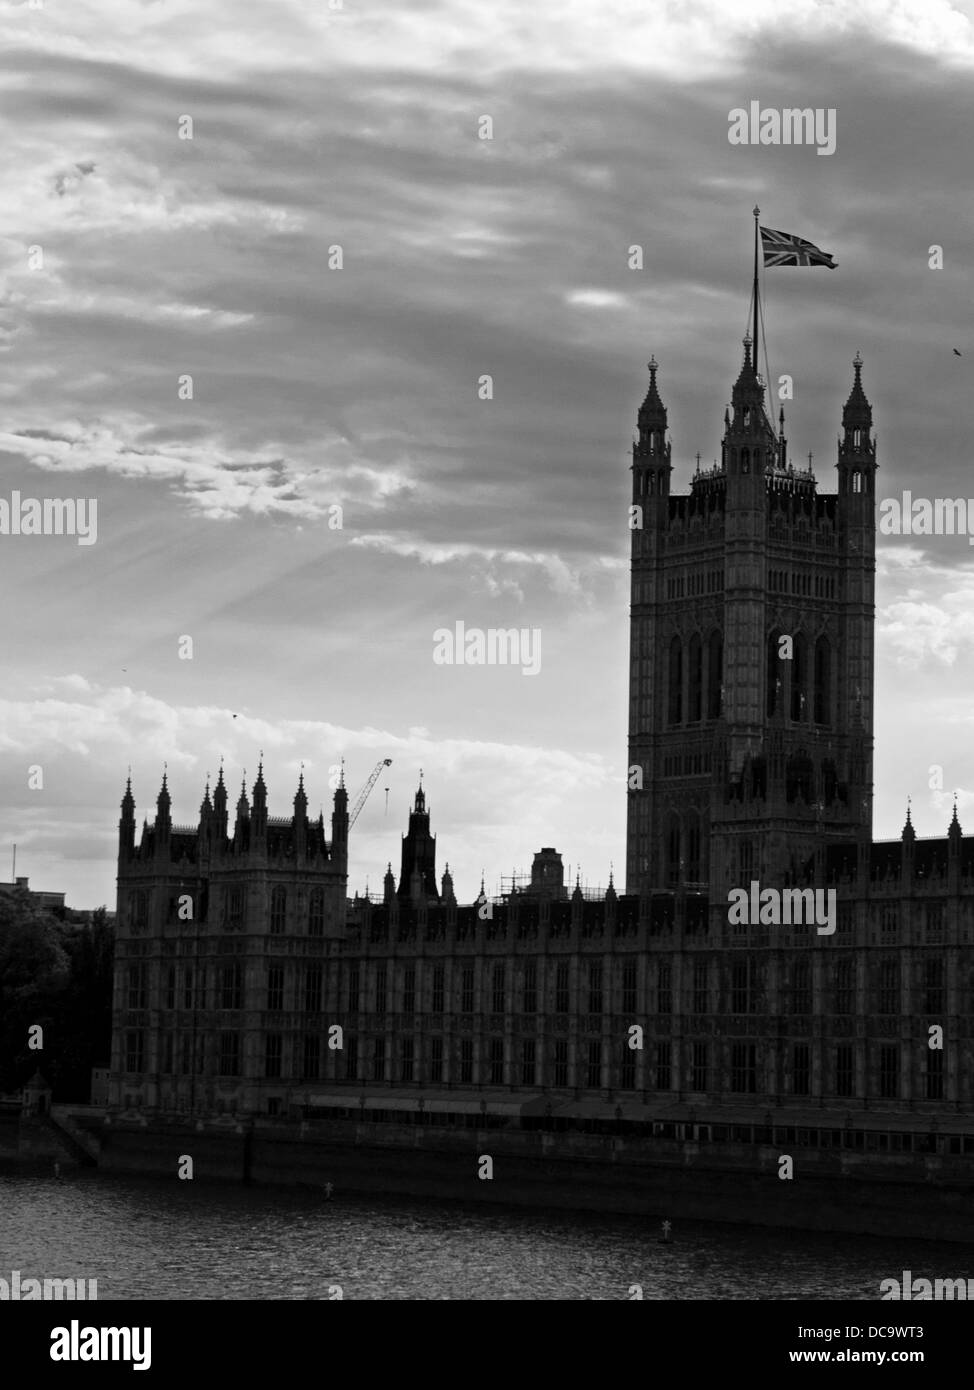 Blick auf den Victoria Tower am südwestlichen Ende des Palace of Westminster (Houses of Parliament), City of Westminster Stockfoto